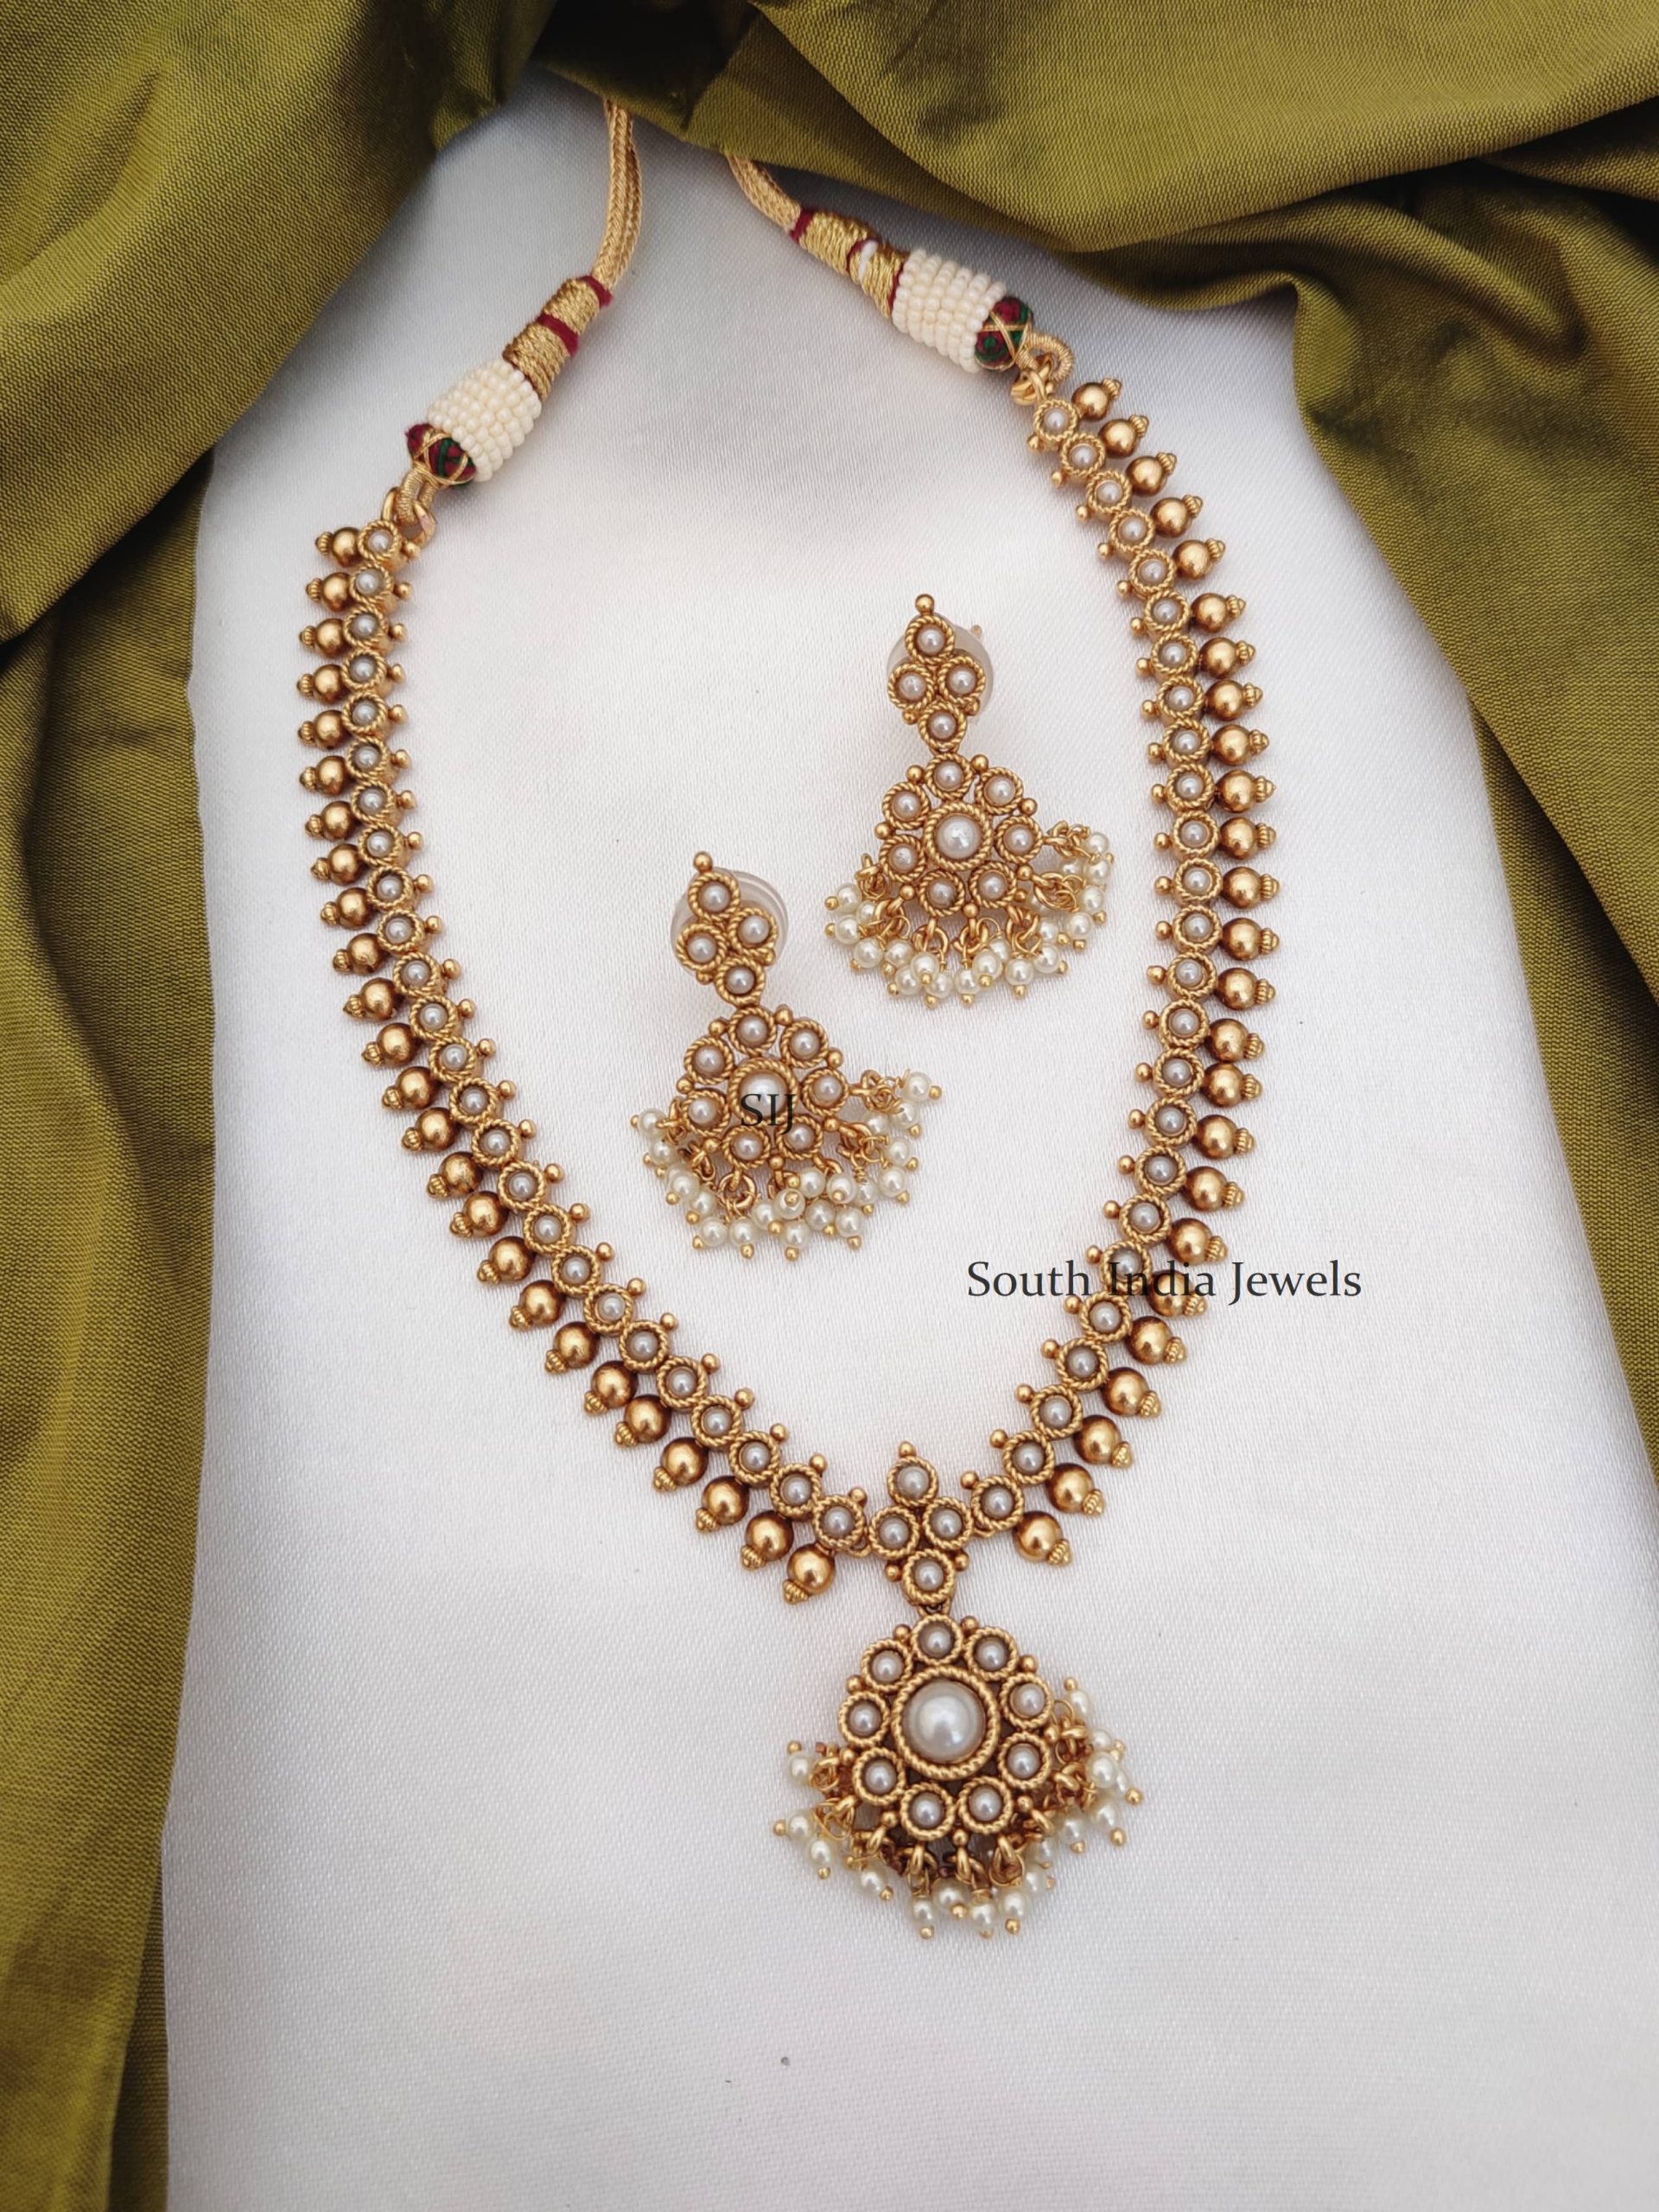 Latest Green Beads Necklace With Gold Pendant Designs | South Indian Jewels